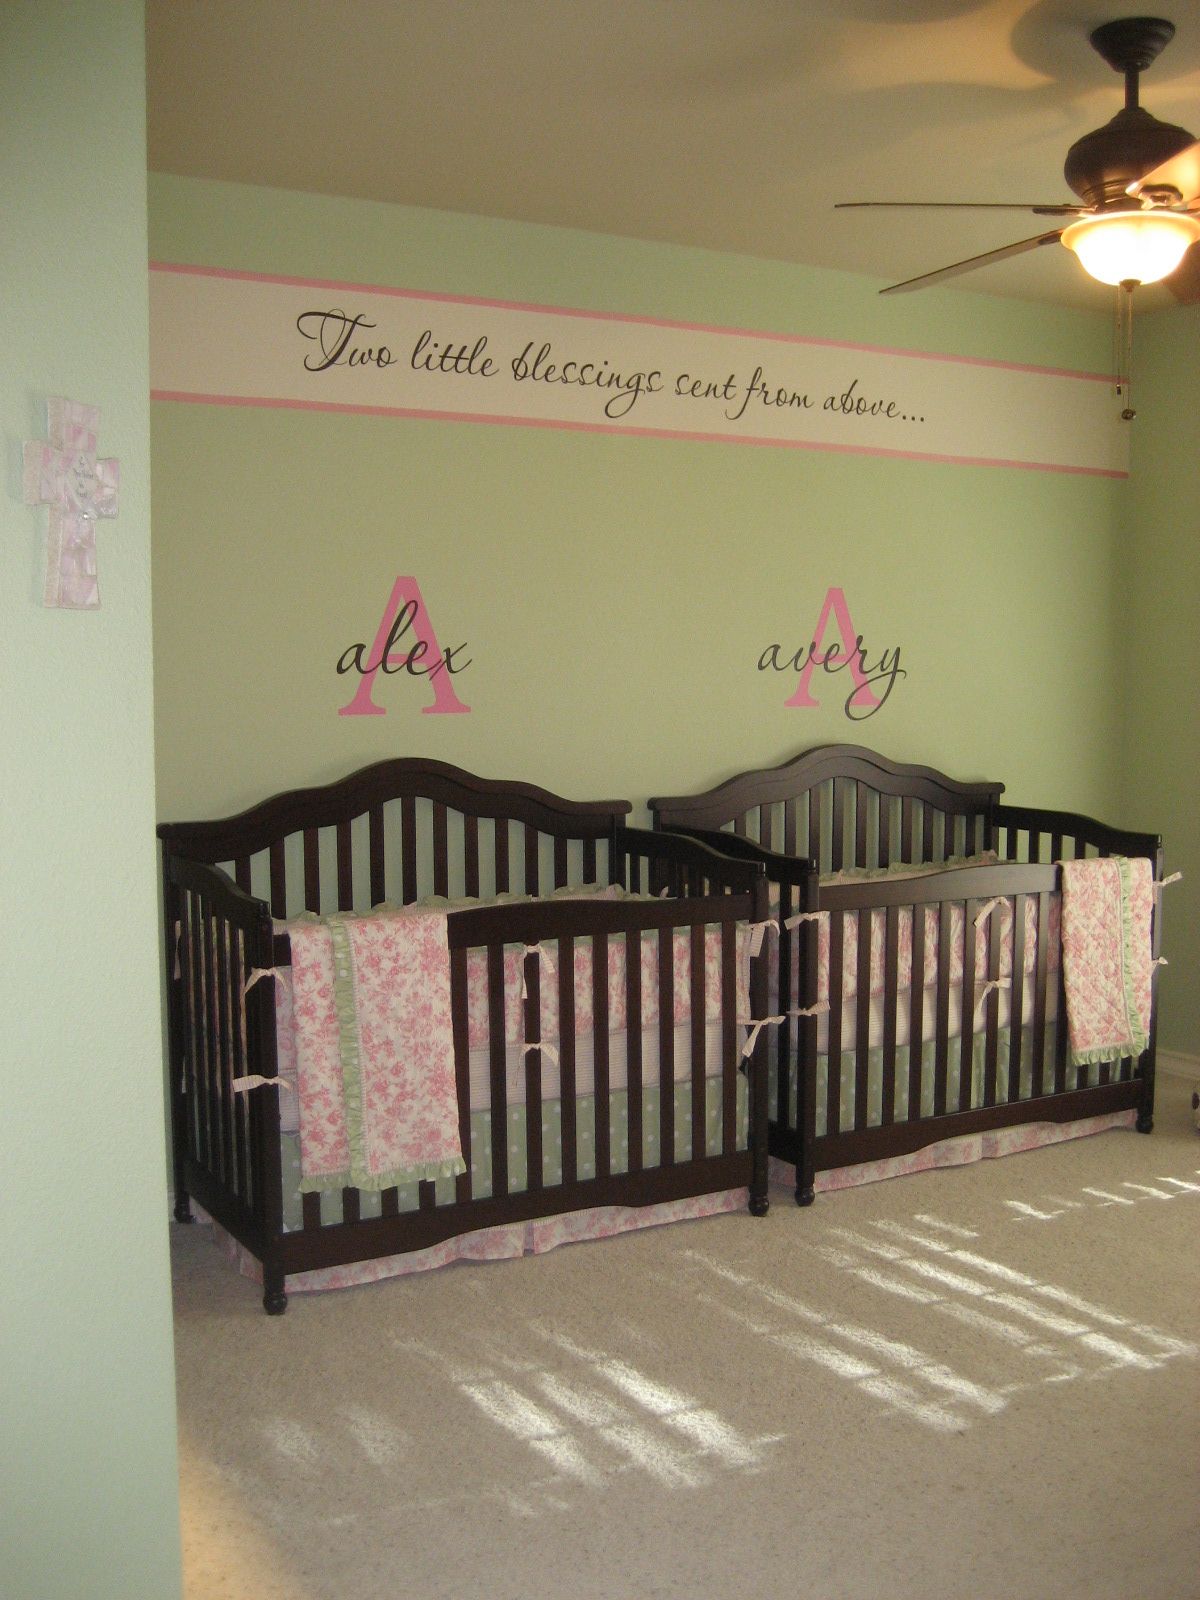 Green Painted Nursery Cool Green Painted Twin Baby Nursery Room Beautified With Pink Quotes And Nickname Decor Above Best Baby Cribs Kids Room Marvelous Best Baby Cribs Designed In Twins Model For Small Room